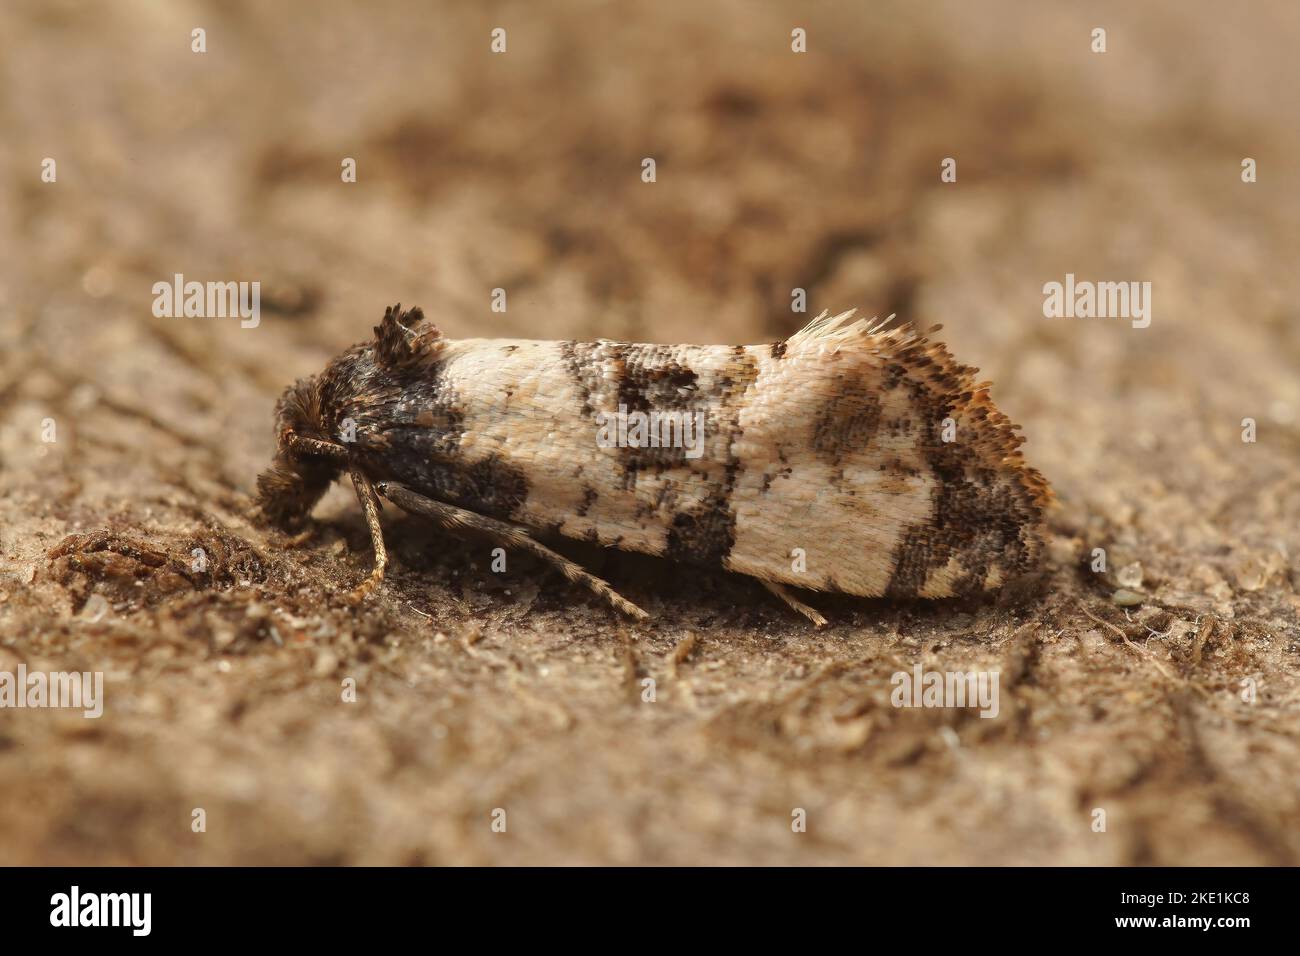 A closeup of a cochylis atricapitana tortricid moth isolated on a wooden surface Stock Photo